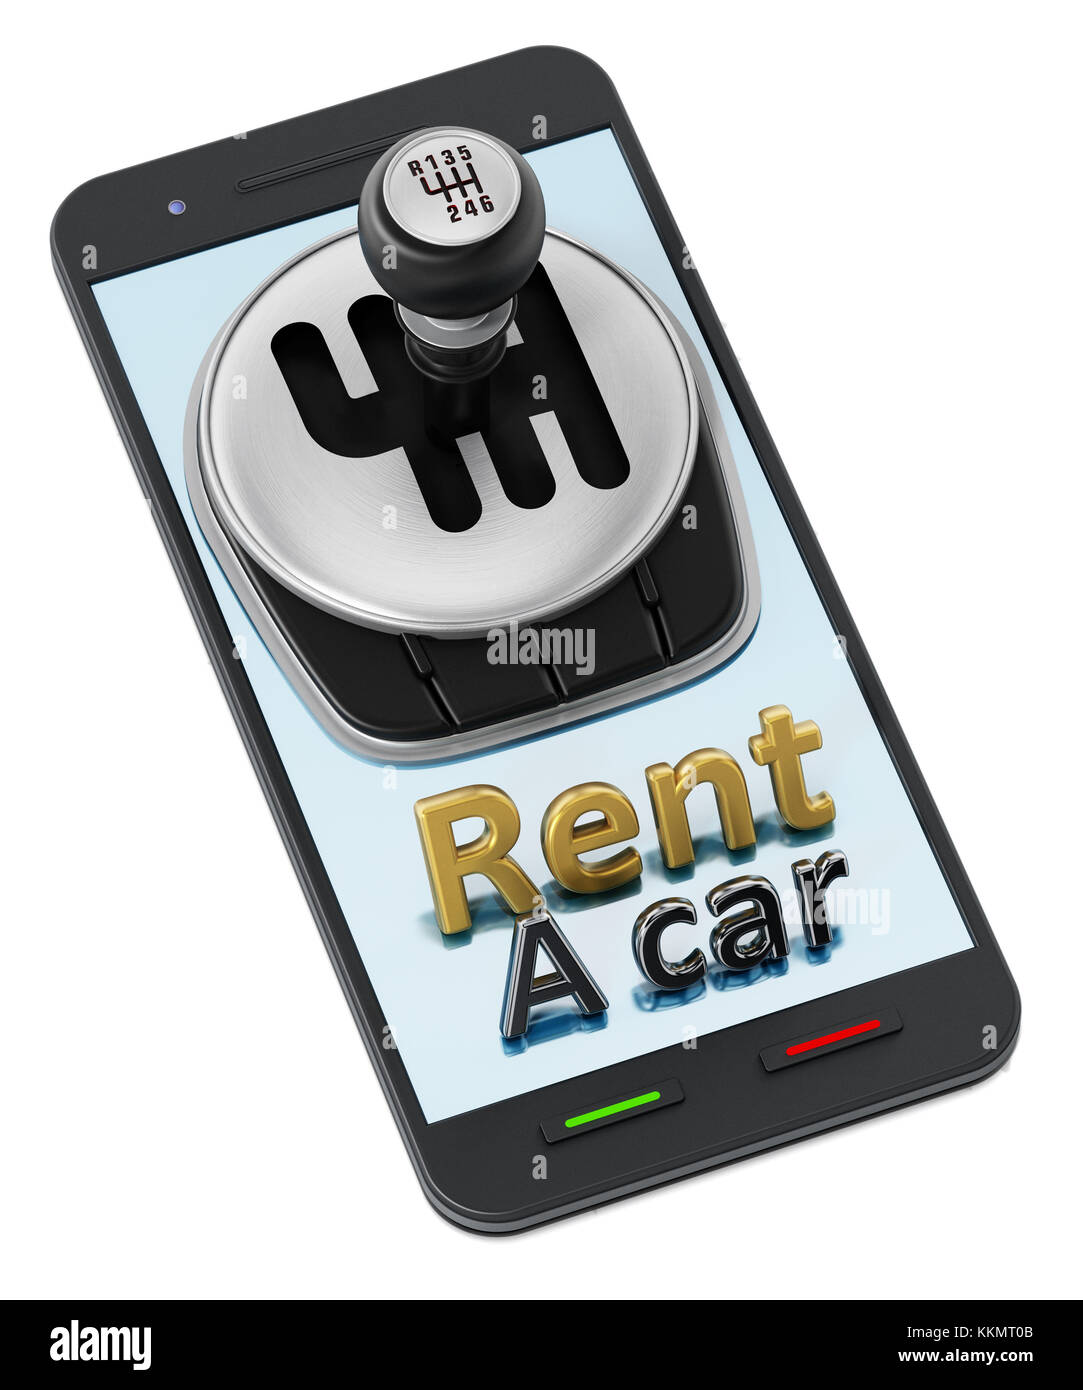 Car manual transmission and rent a car text standing on smartphone. 3D illustration. Stock Photo